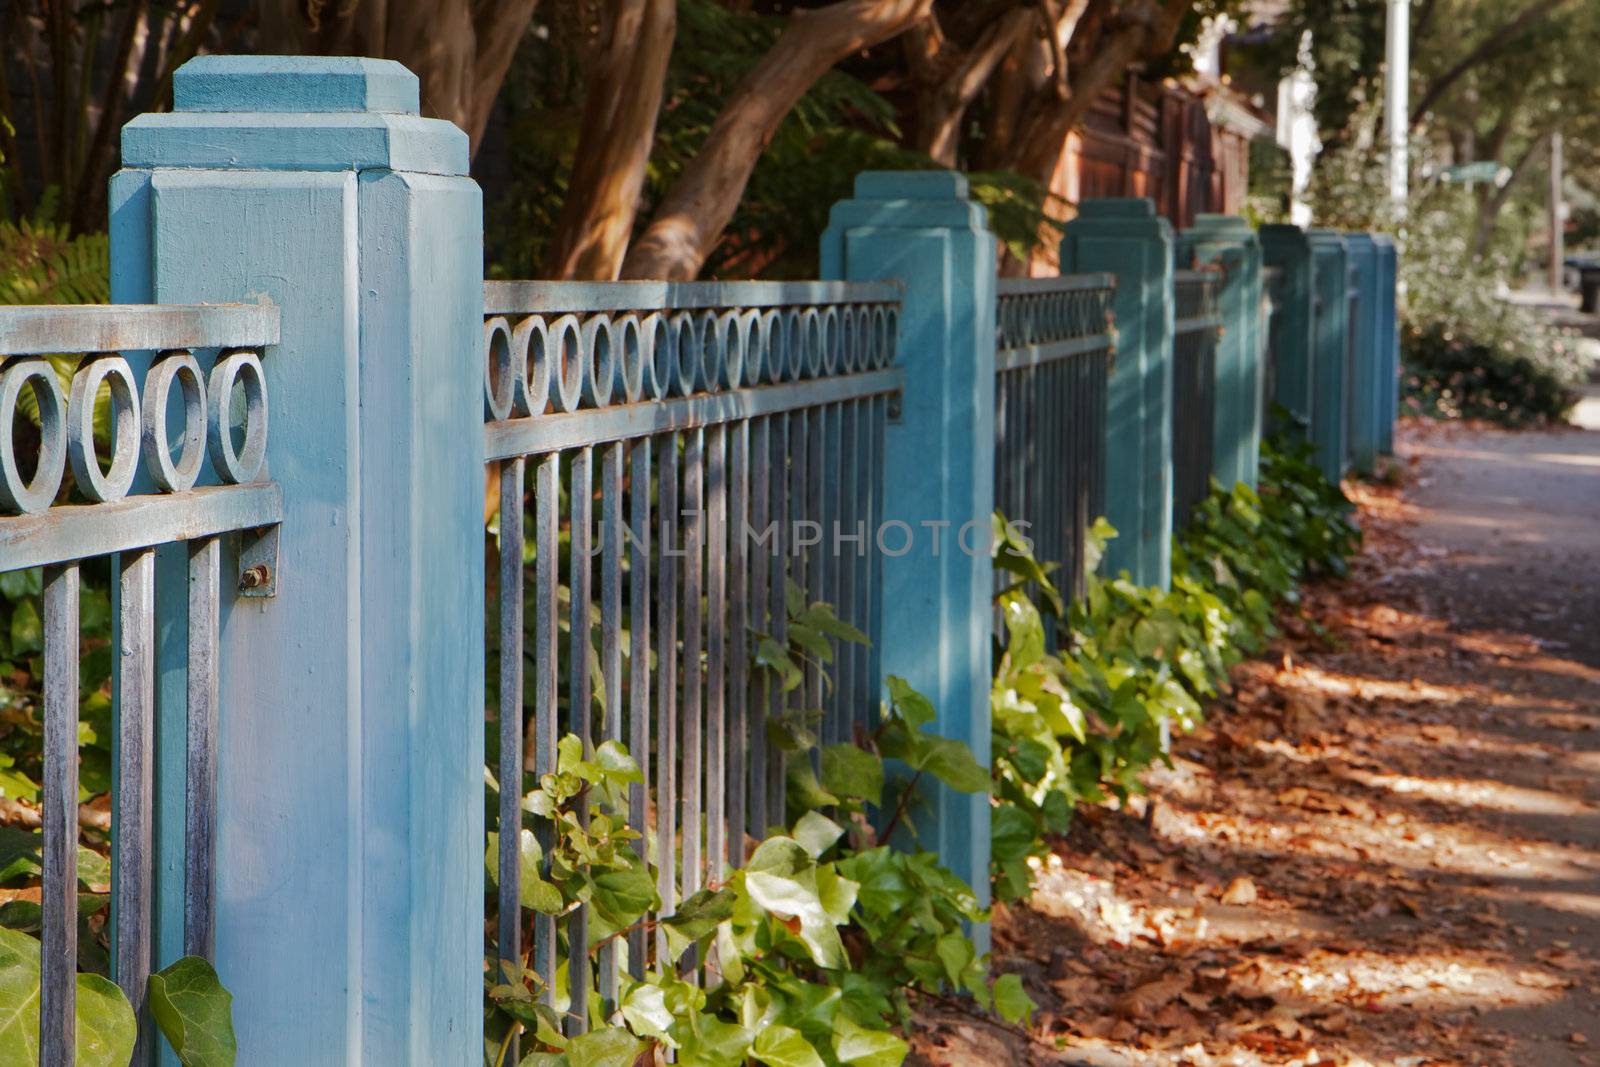 Blue metal and wood fence dimishing in distance with soft focus trees in background